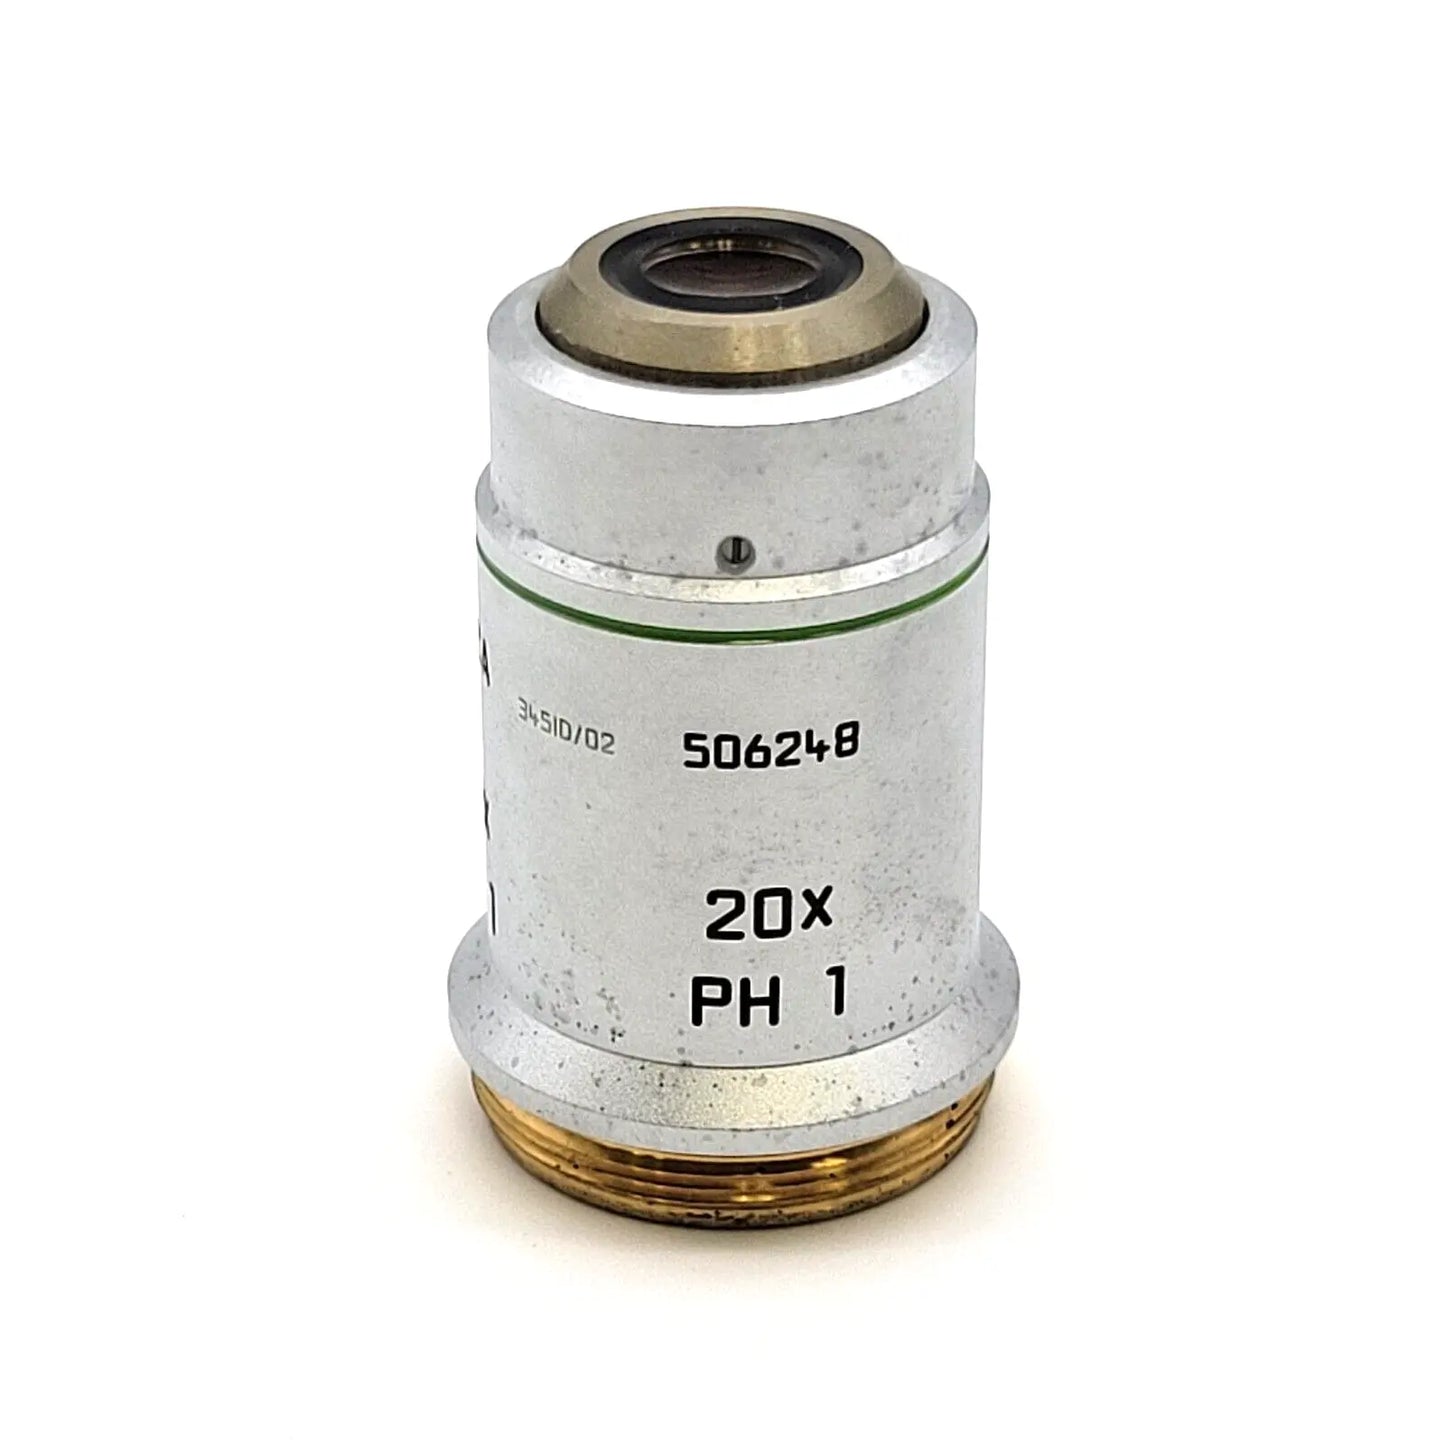 Leica Microscope Objective N Plan L 20x Ph1 ∞/1.0/C 506248 Phase Contrast - microscopemarketplace